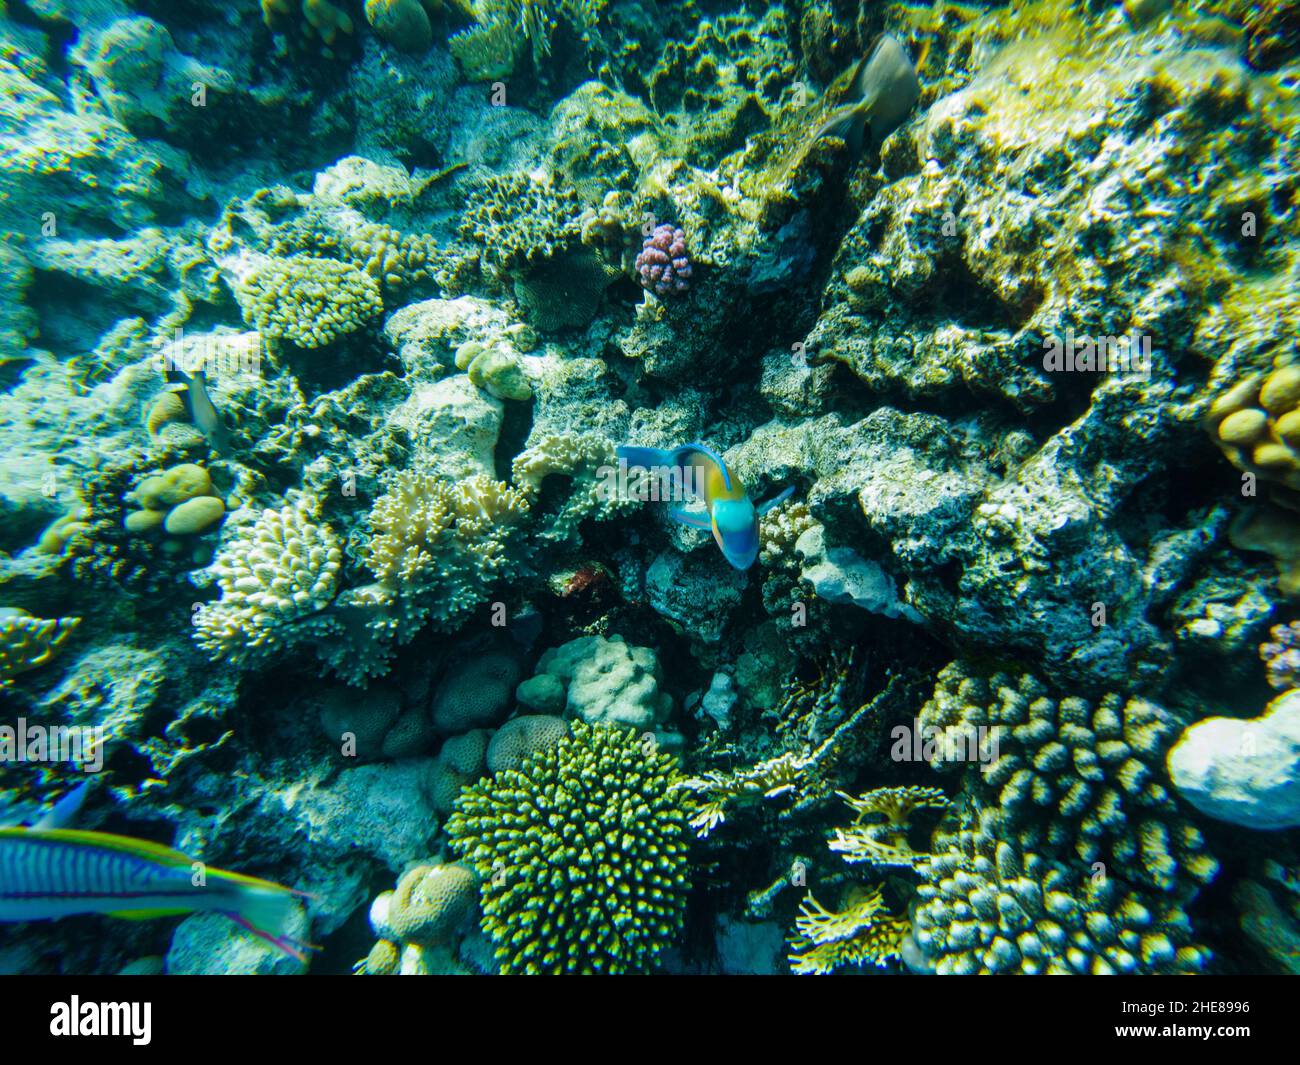 Tropical coral fish Parrot fish (Scarus frenatus) by the corals of the red sea. Stock Photo